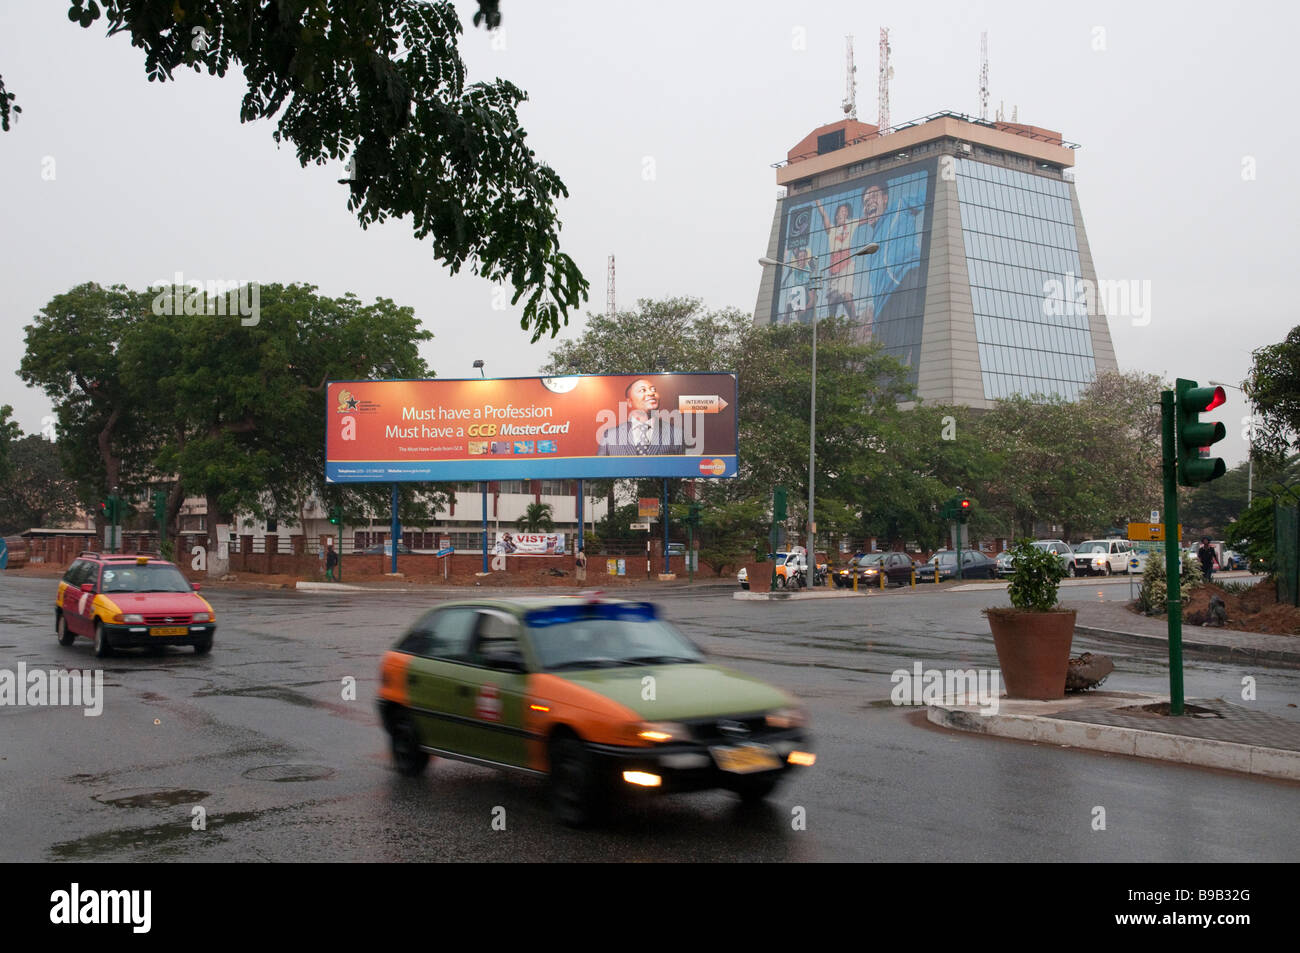 West africa Ghana Accra Zain tower with advertising poster Stock Photo